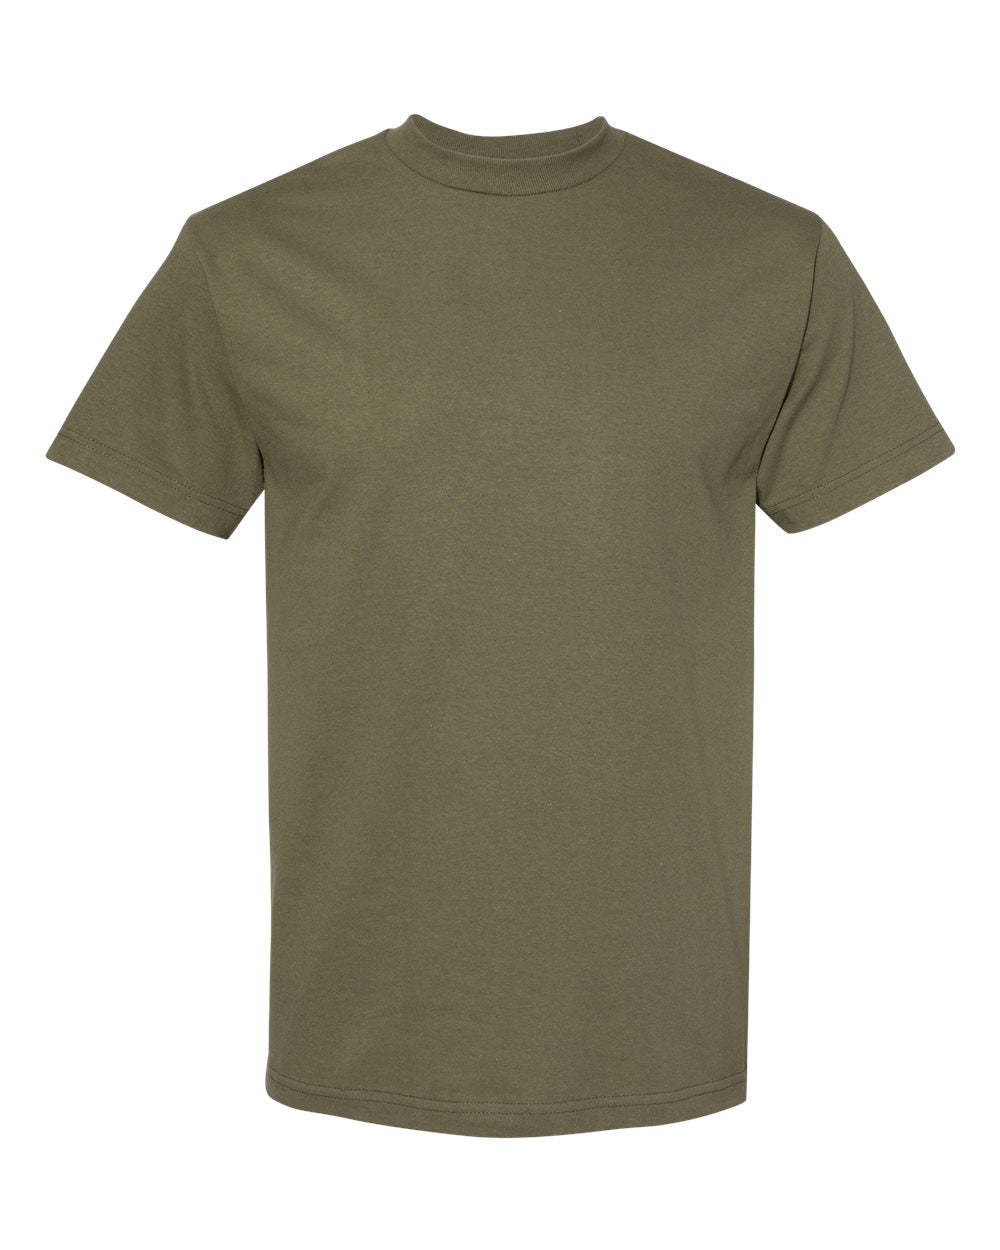 Pretreated American Apparel 1301 Heavy Cotton Tee - Military Green